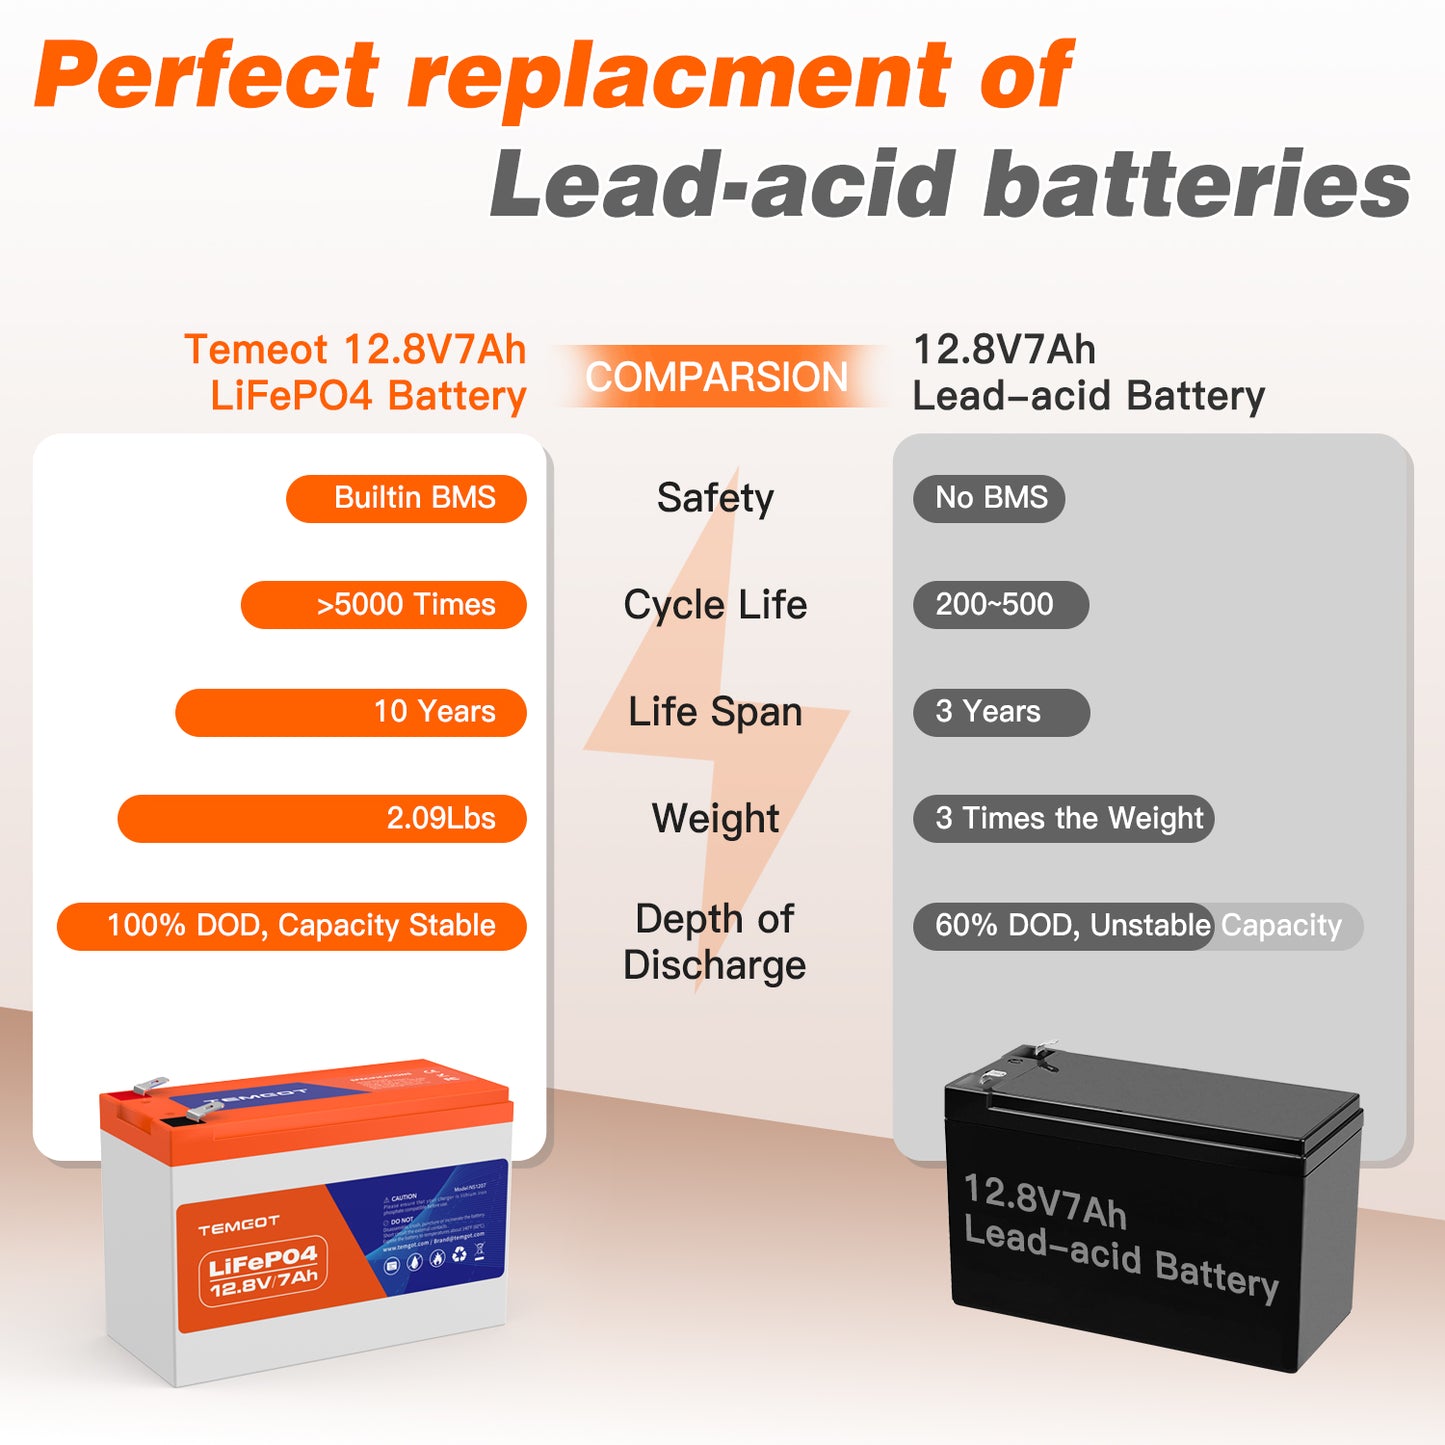 12V 7Ah Battery, Rechargeable LiFePO4 Battery, Built-in 7A BMS, 5000+ Deep Cycle